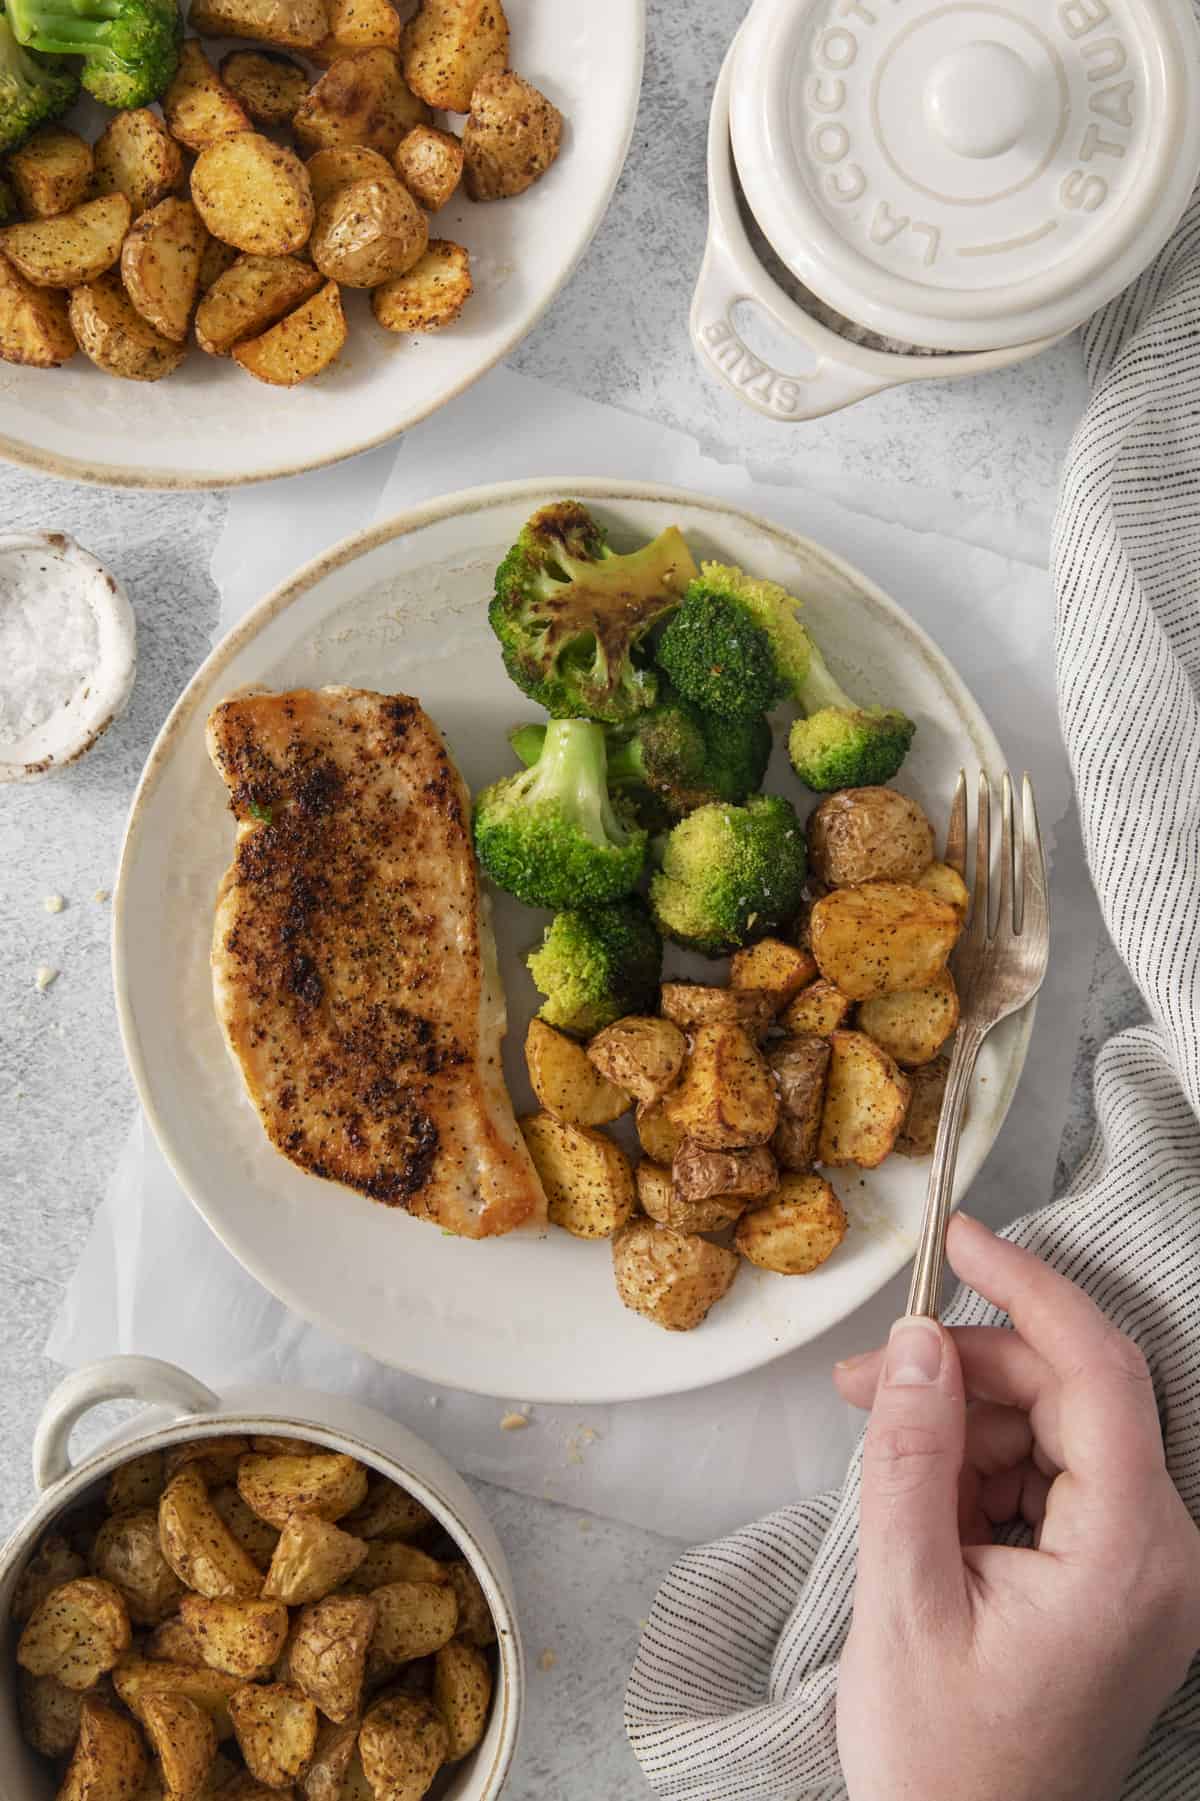 a fork being placed onto a plate with roasted potatoes, broccoli, and meat.